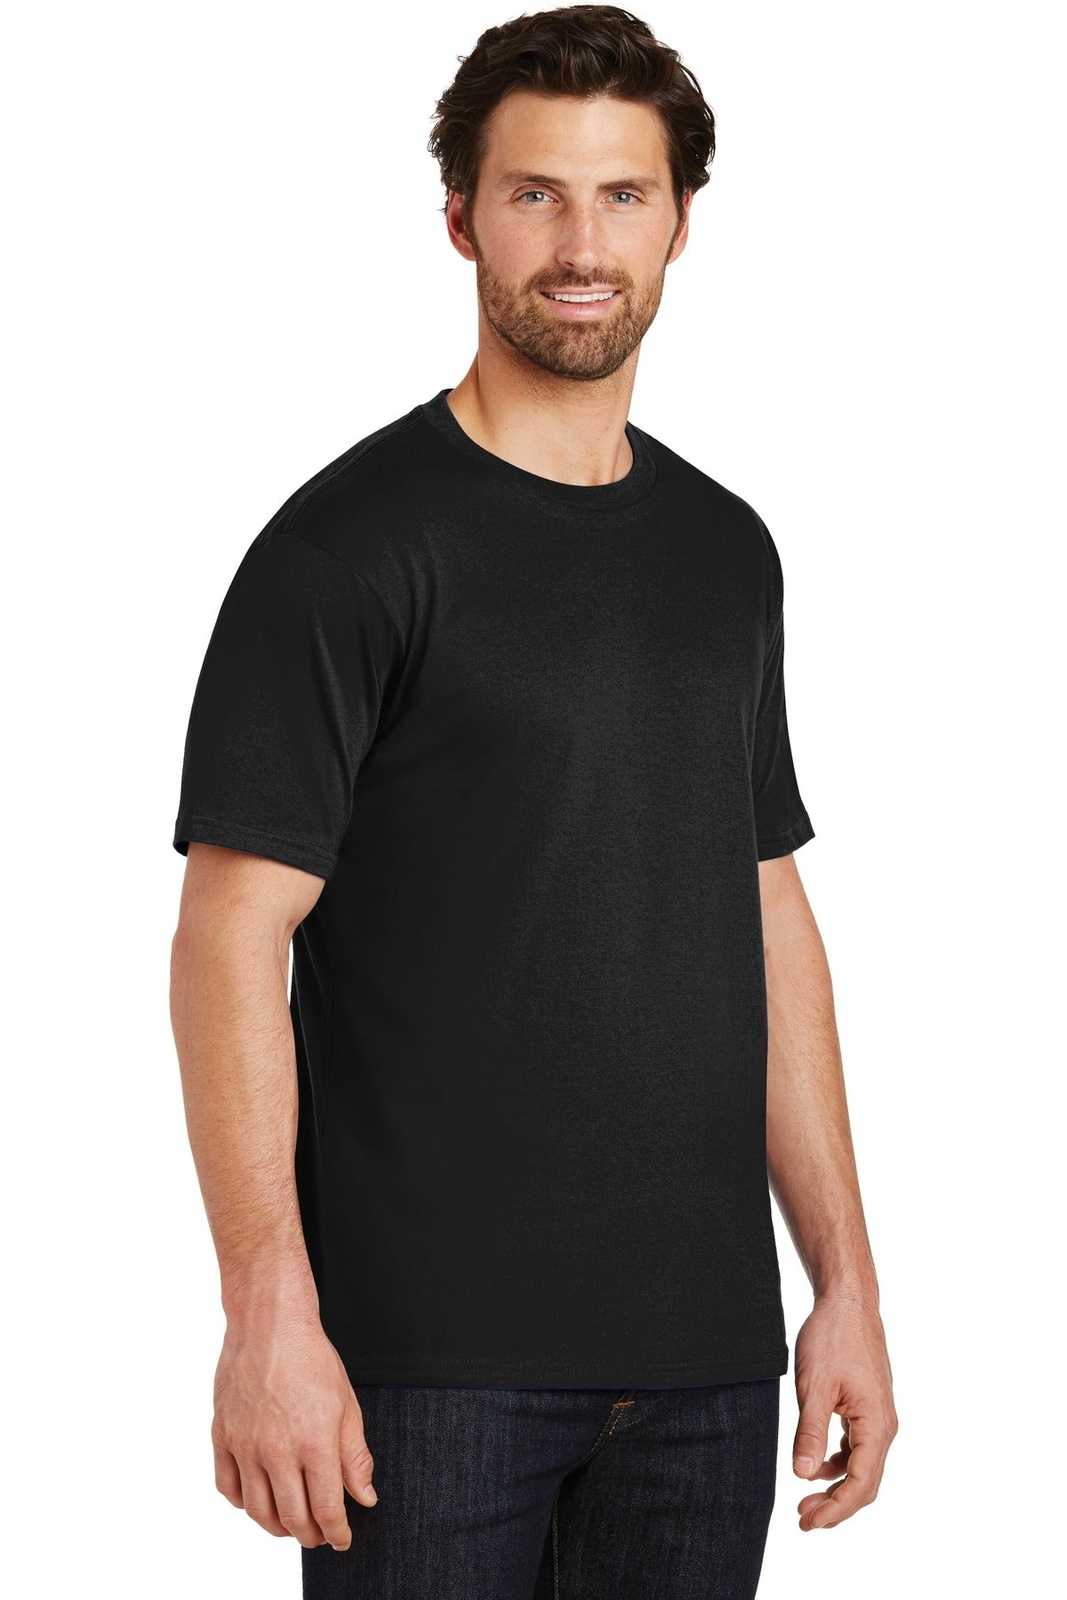 District DT104 Perfect Weight Tee - Jet Black - HIT a Double - 4